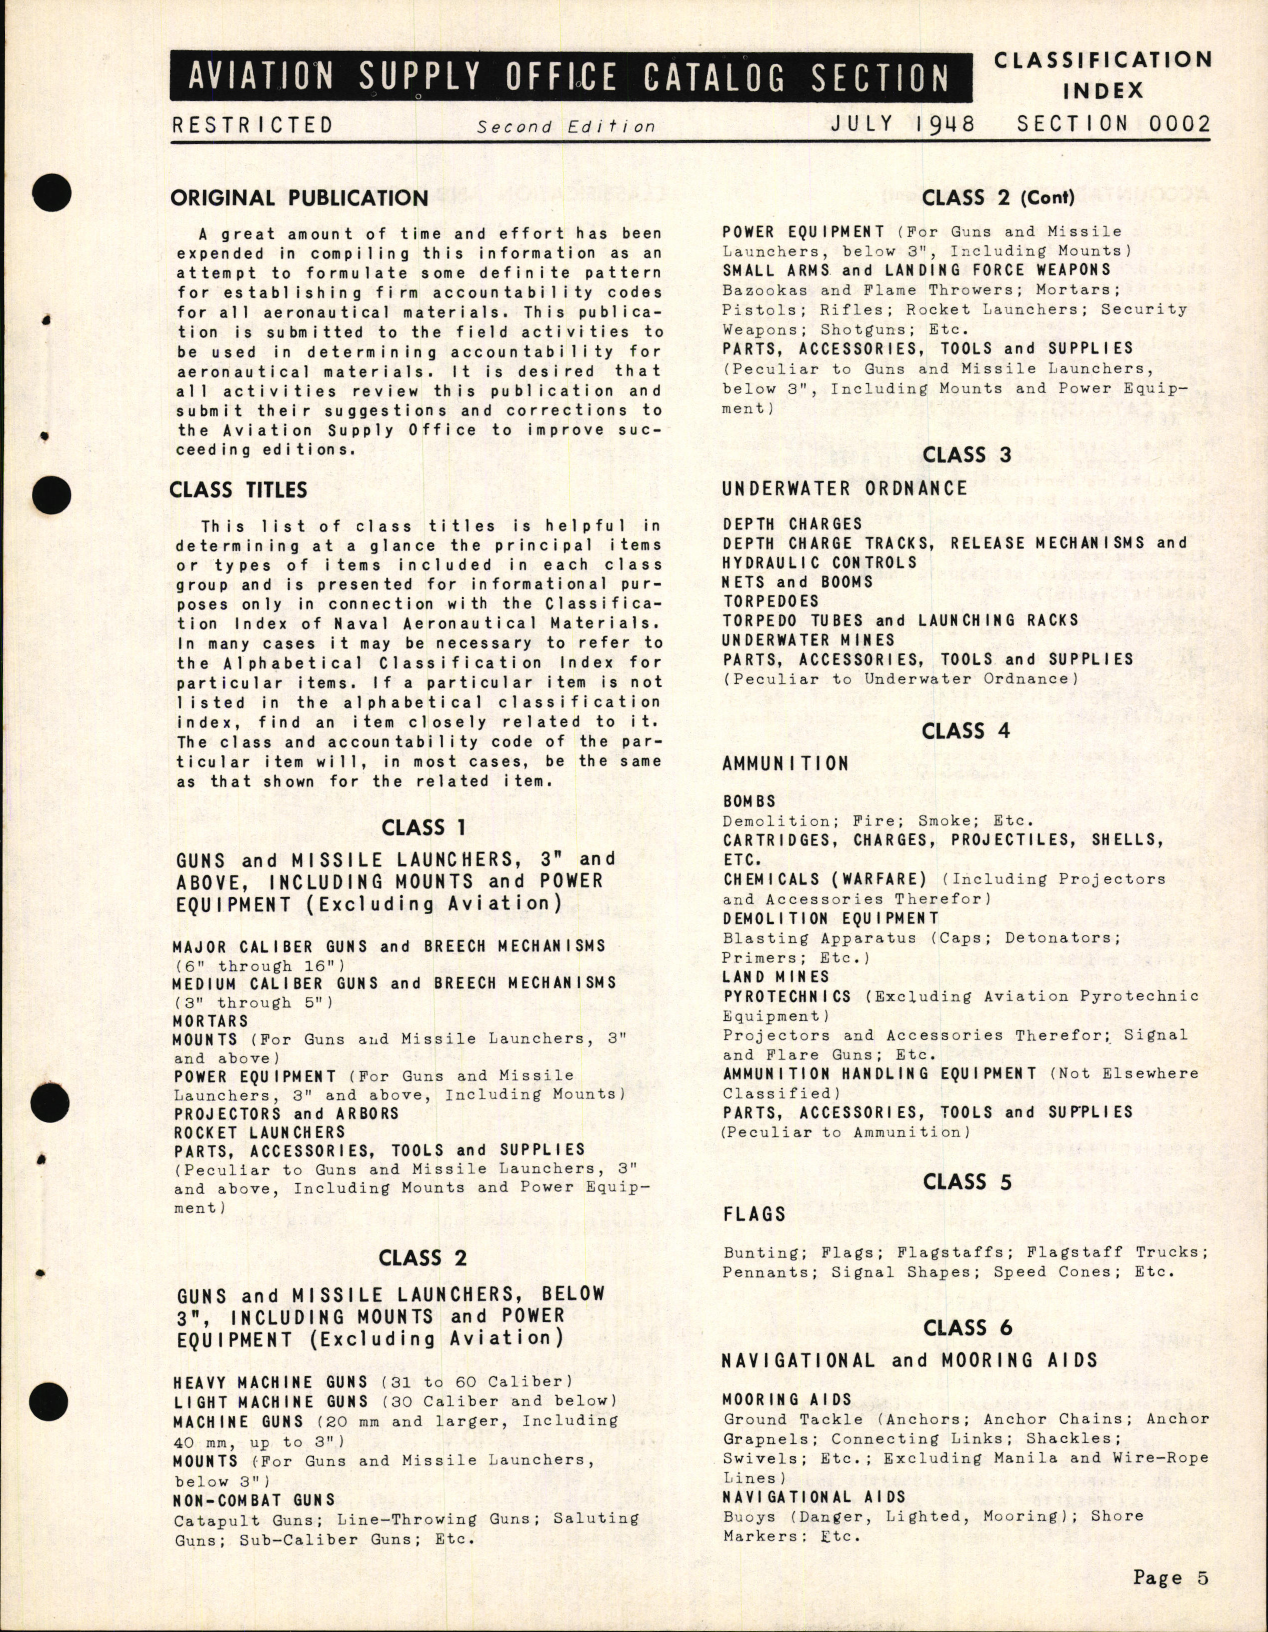 Sample page 7 from AirCorps Library document: Classification Index of Naval Aeronautical Materials